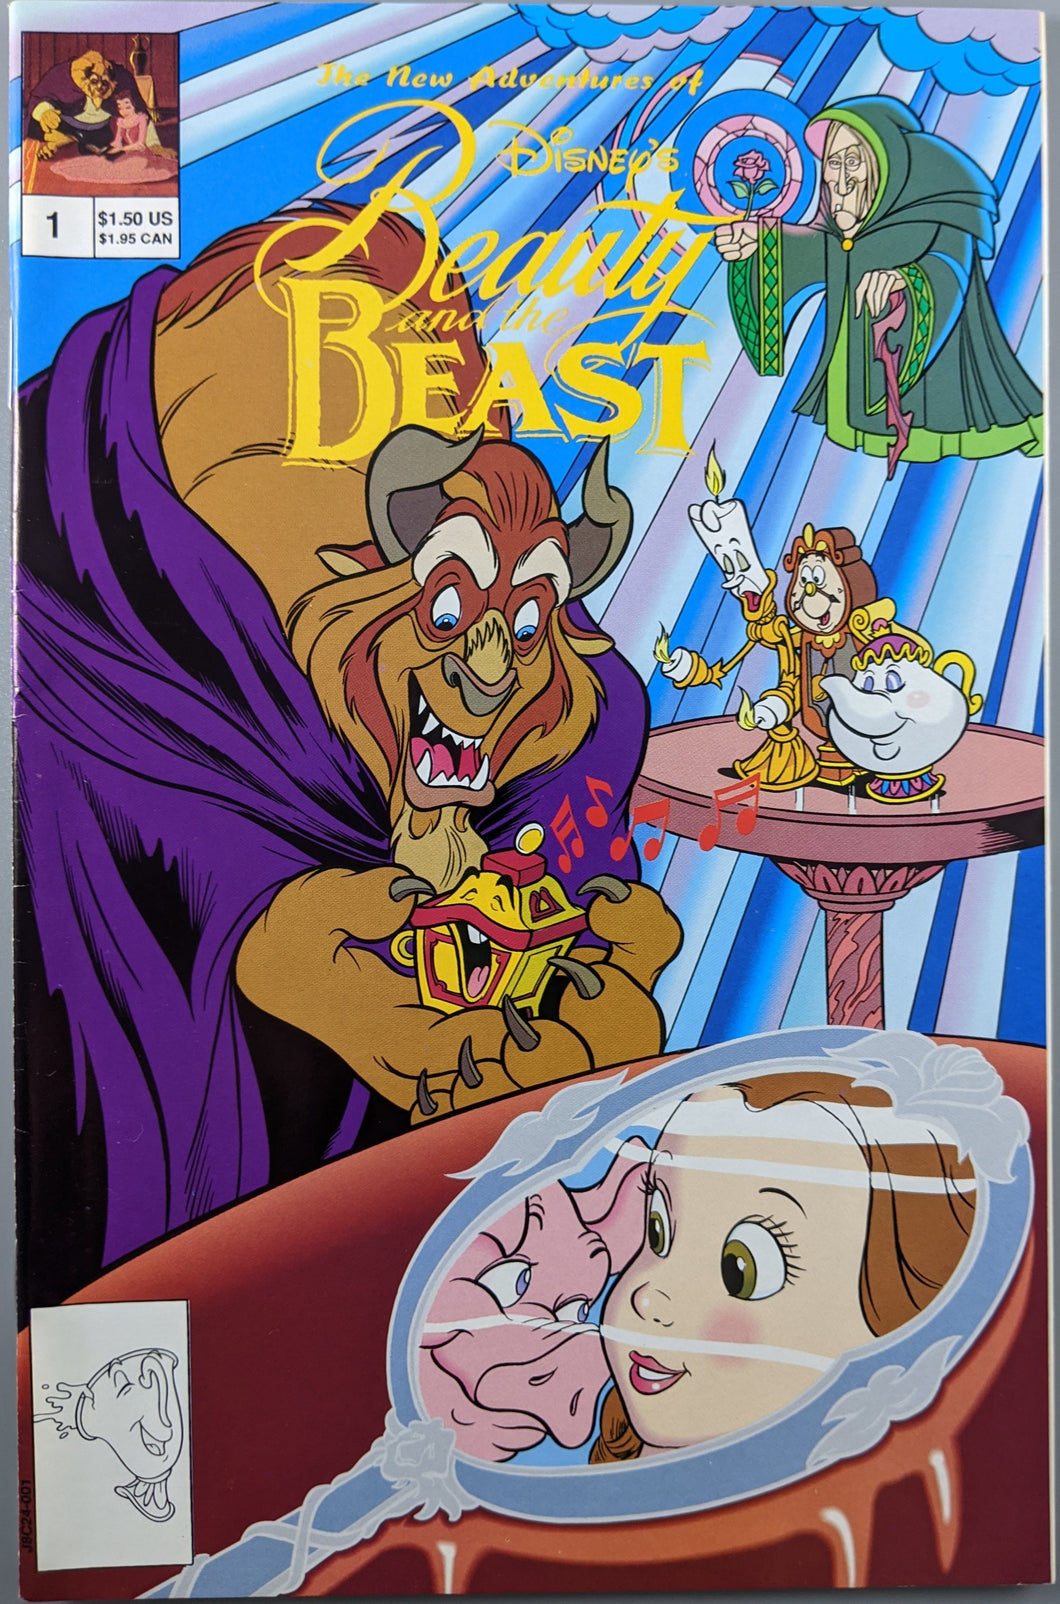 Disney's New Adventures Of Beauty And The Beast #1 Comic Book Cover Art